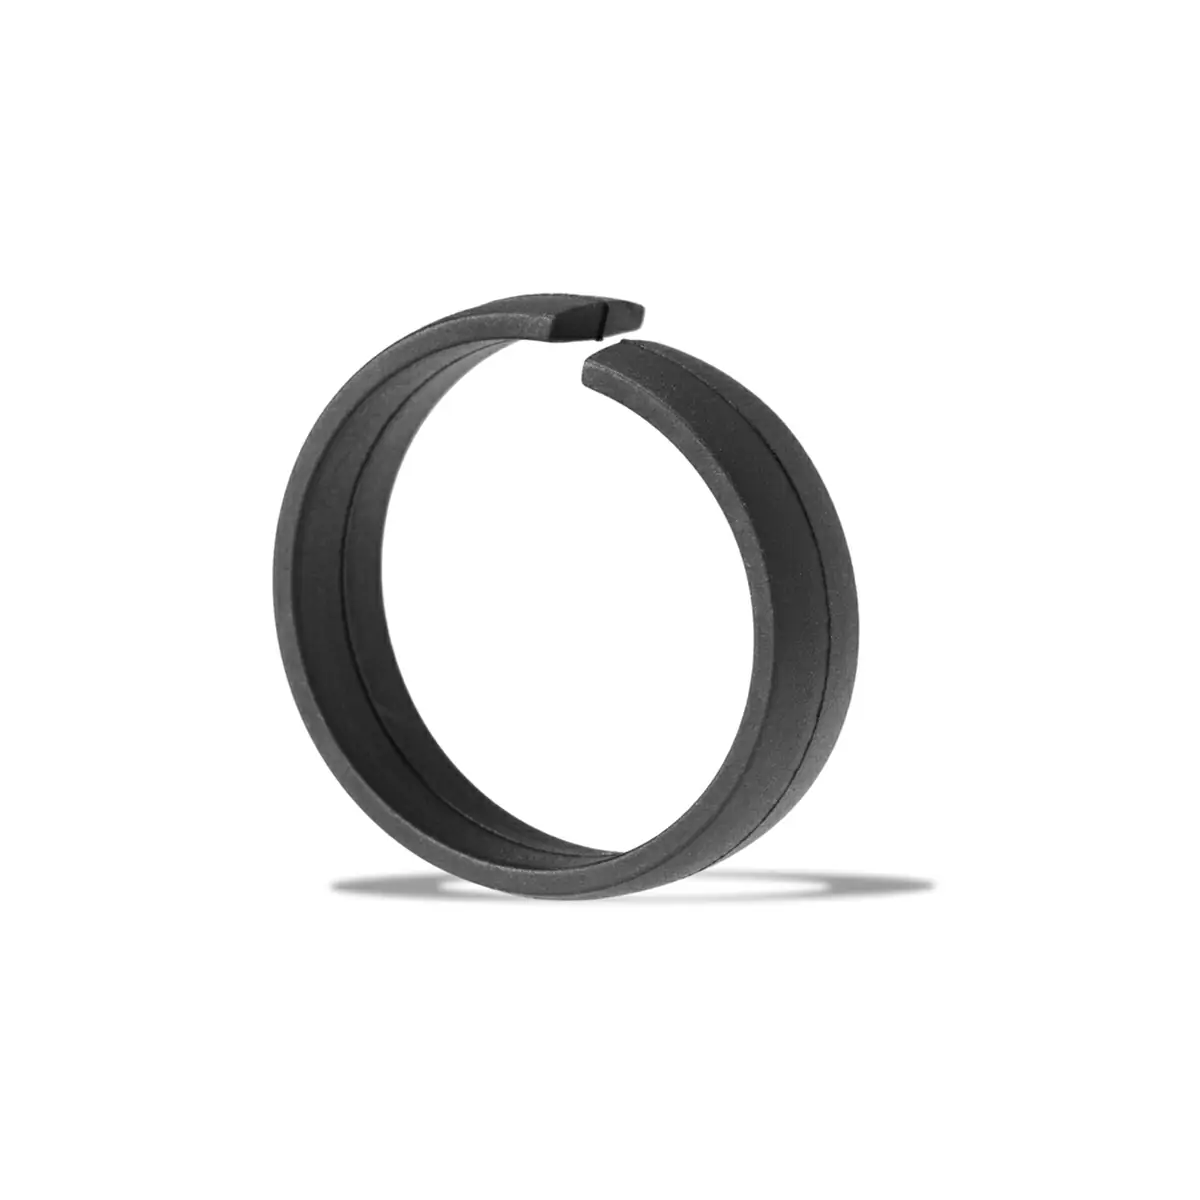 Rubber spacer for Kiox 300 display support 35mm - image